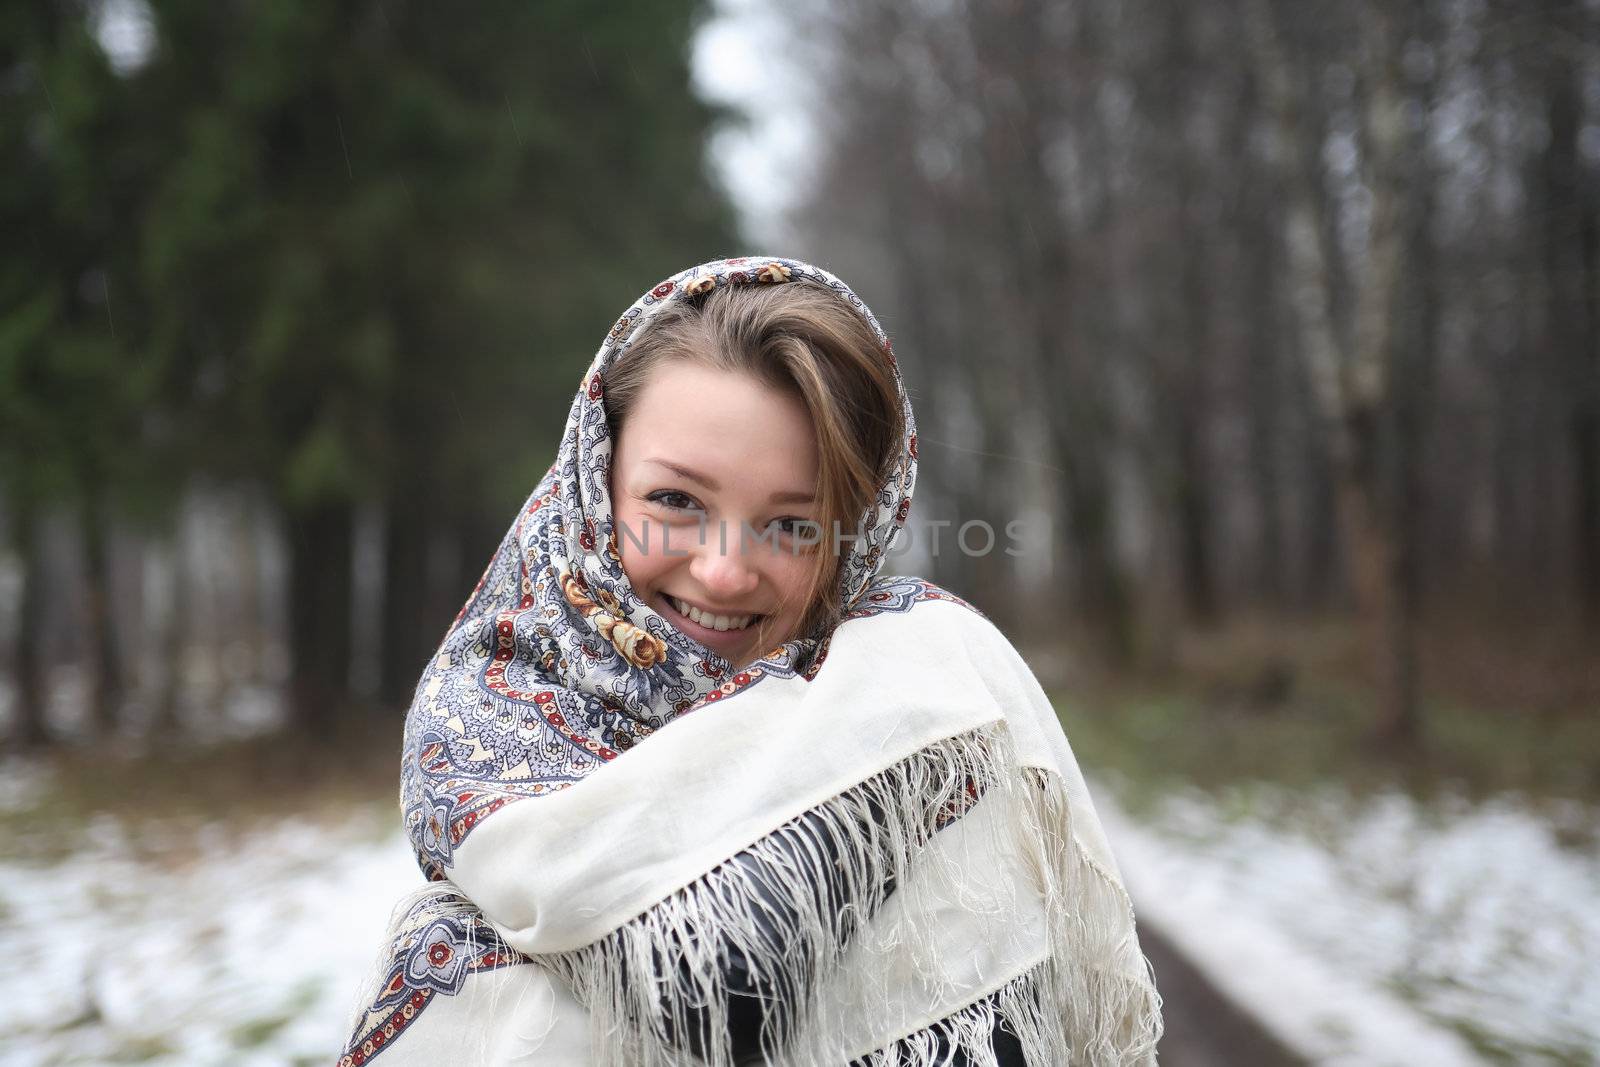 Beautiful young russian girl wearing traditional headscarf on forest background